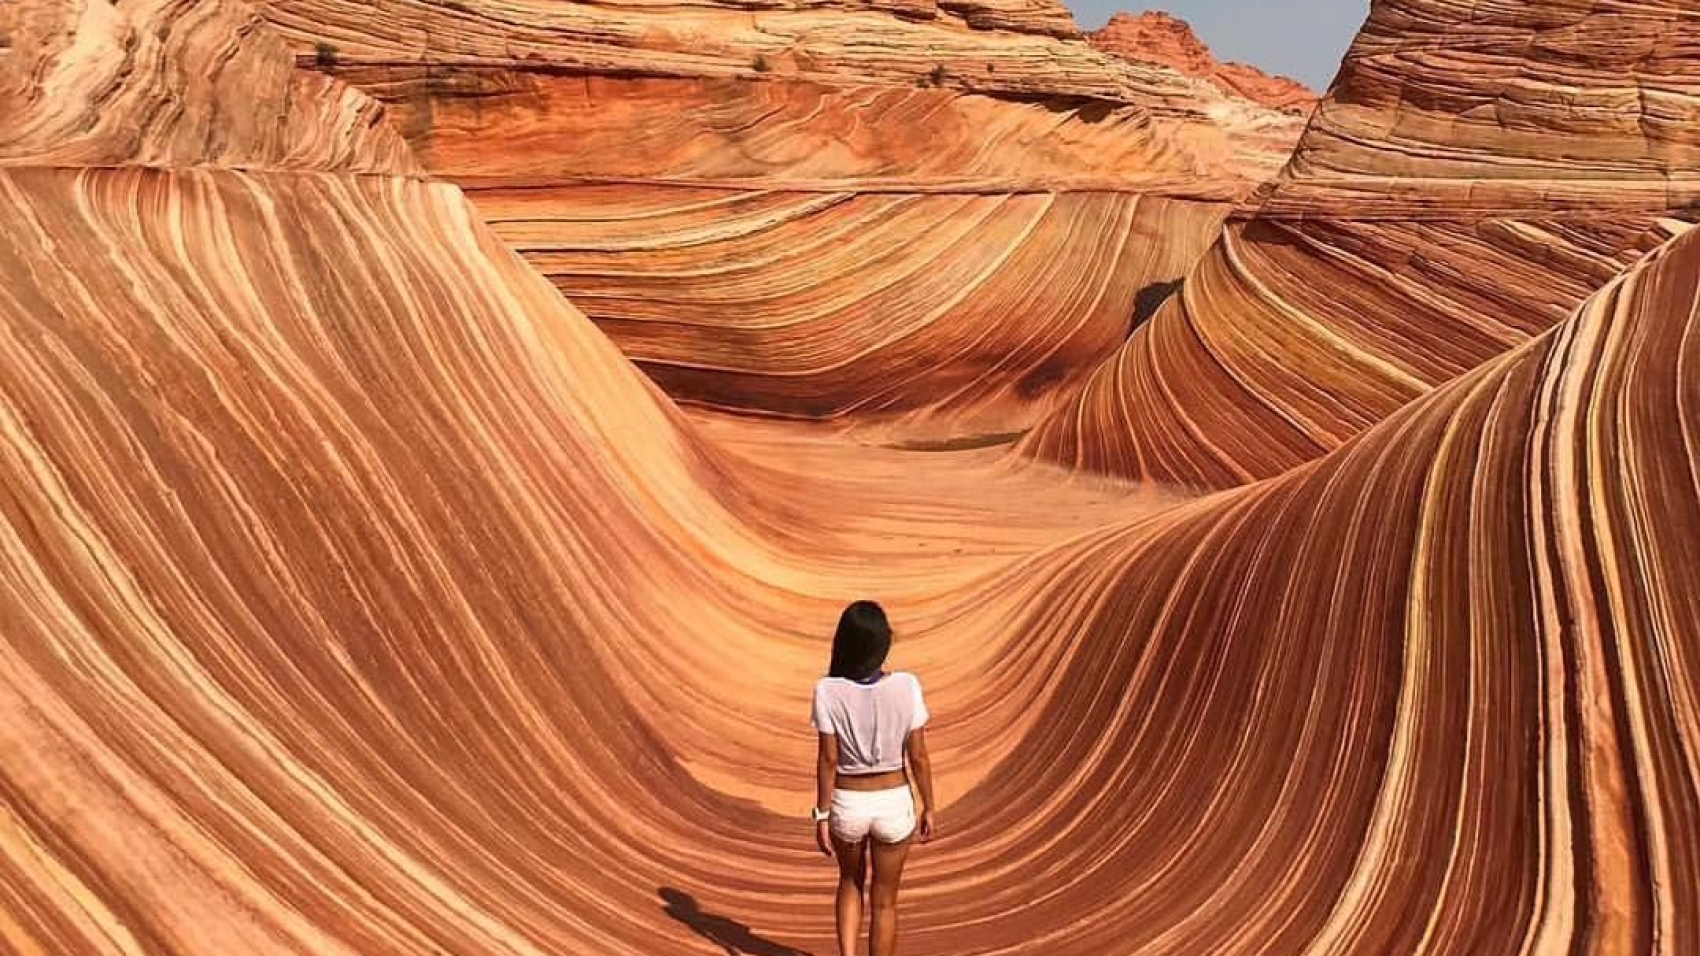 25 Surreal Places In The United States You Won’t Believe Really Exist Krystal Kinney